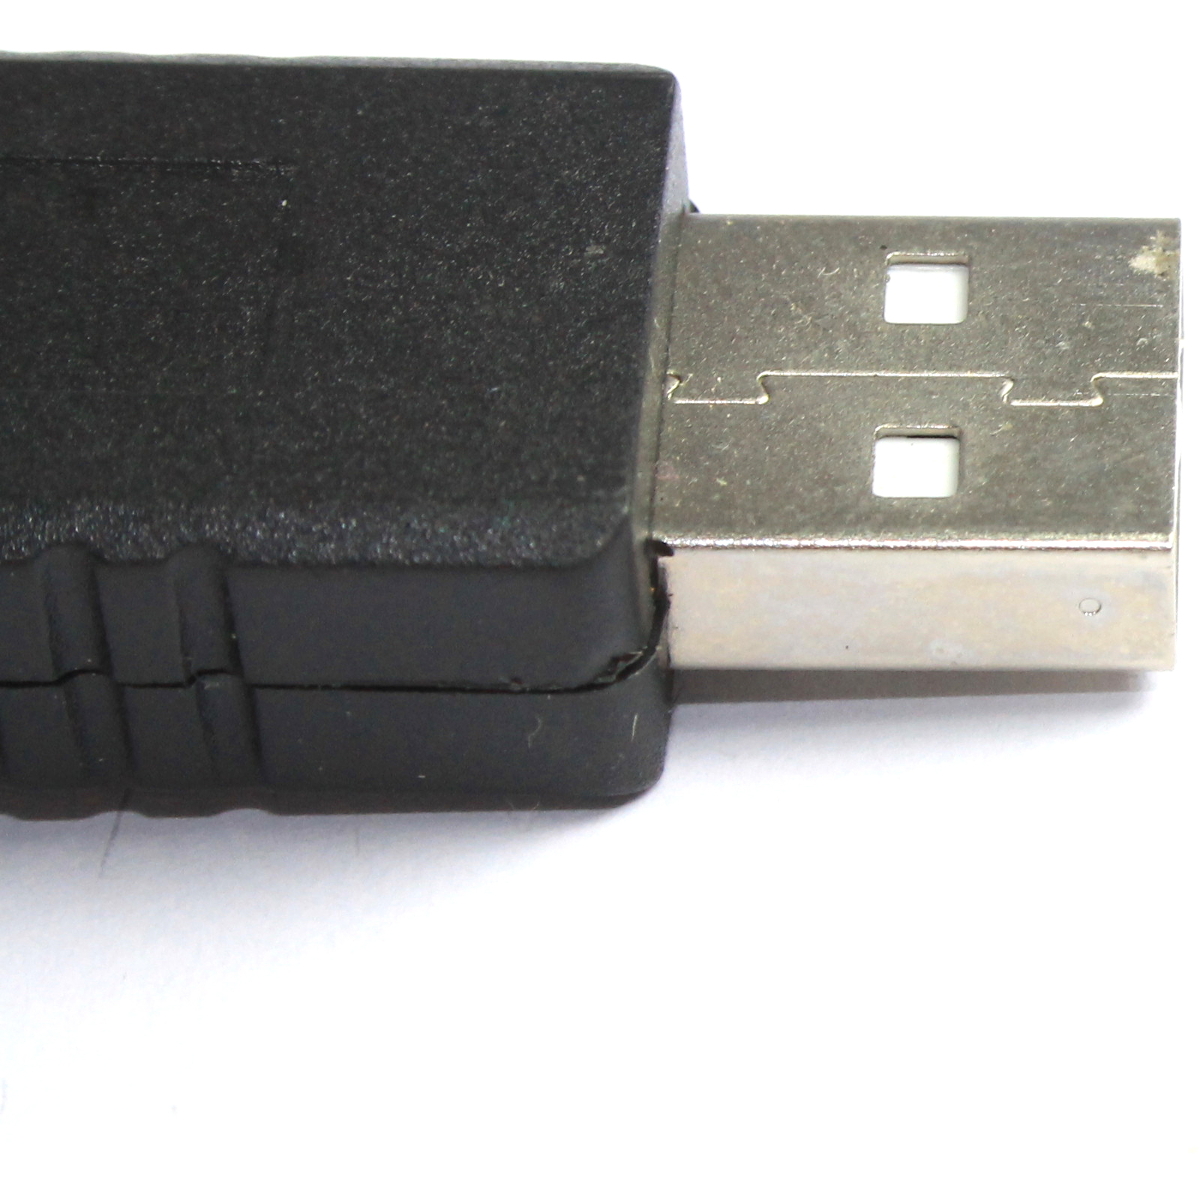 PL2303HX USB Transfer to TTL Serial Adapter Cable Image 3